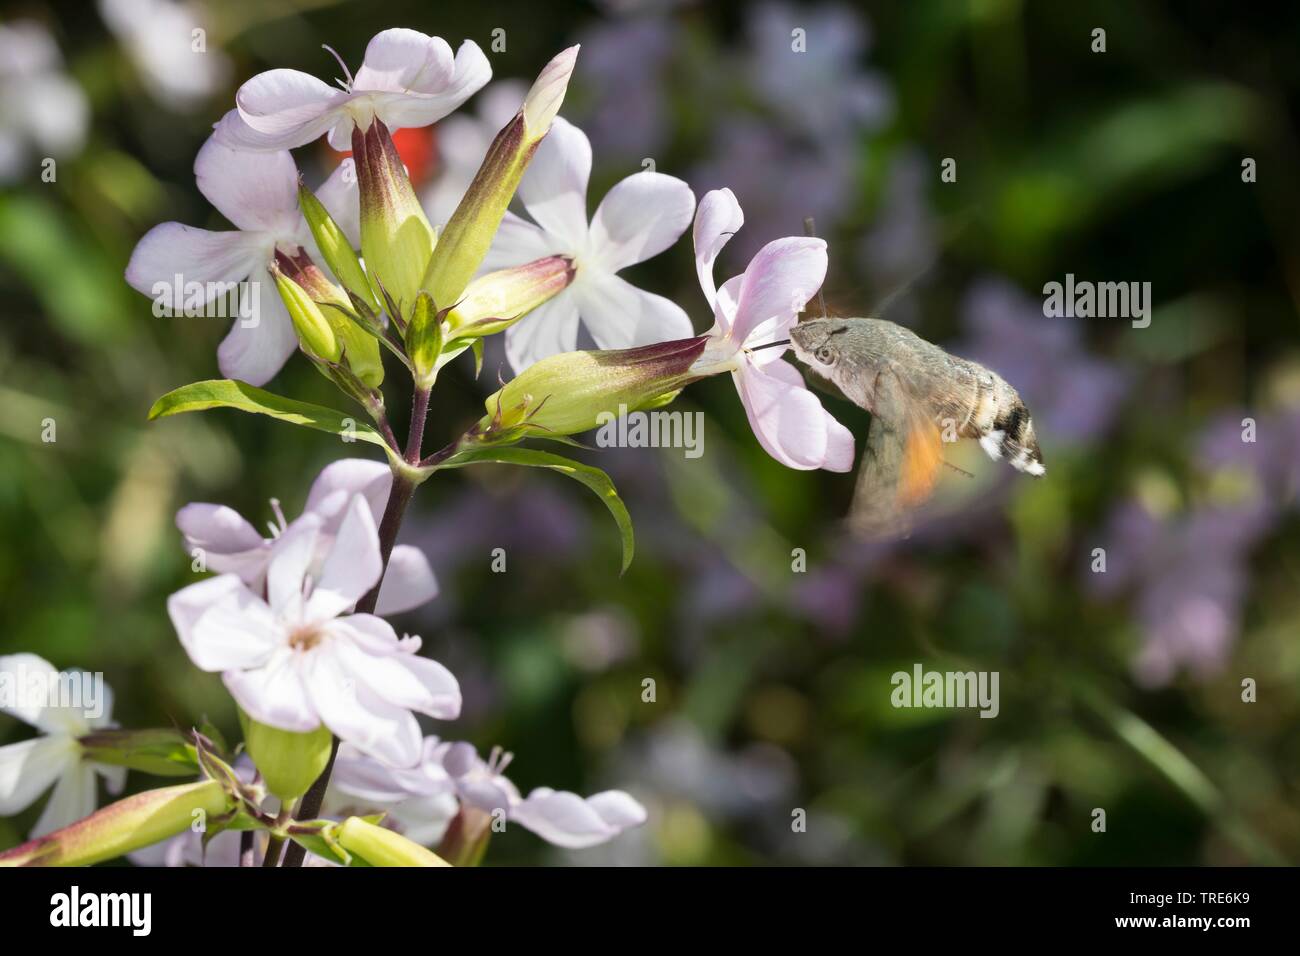 Hummingbird hawkmoth (Macroglossum stellatarum), hovering in front of a flower of Saponaria officinalis, Germany Stock Photo